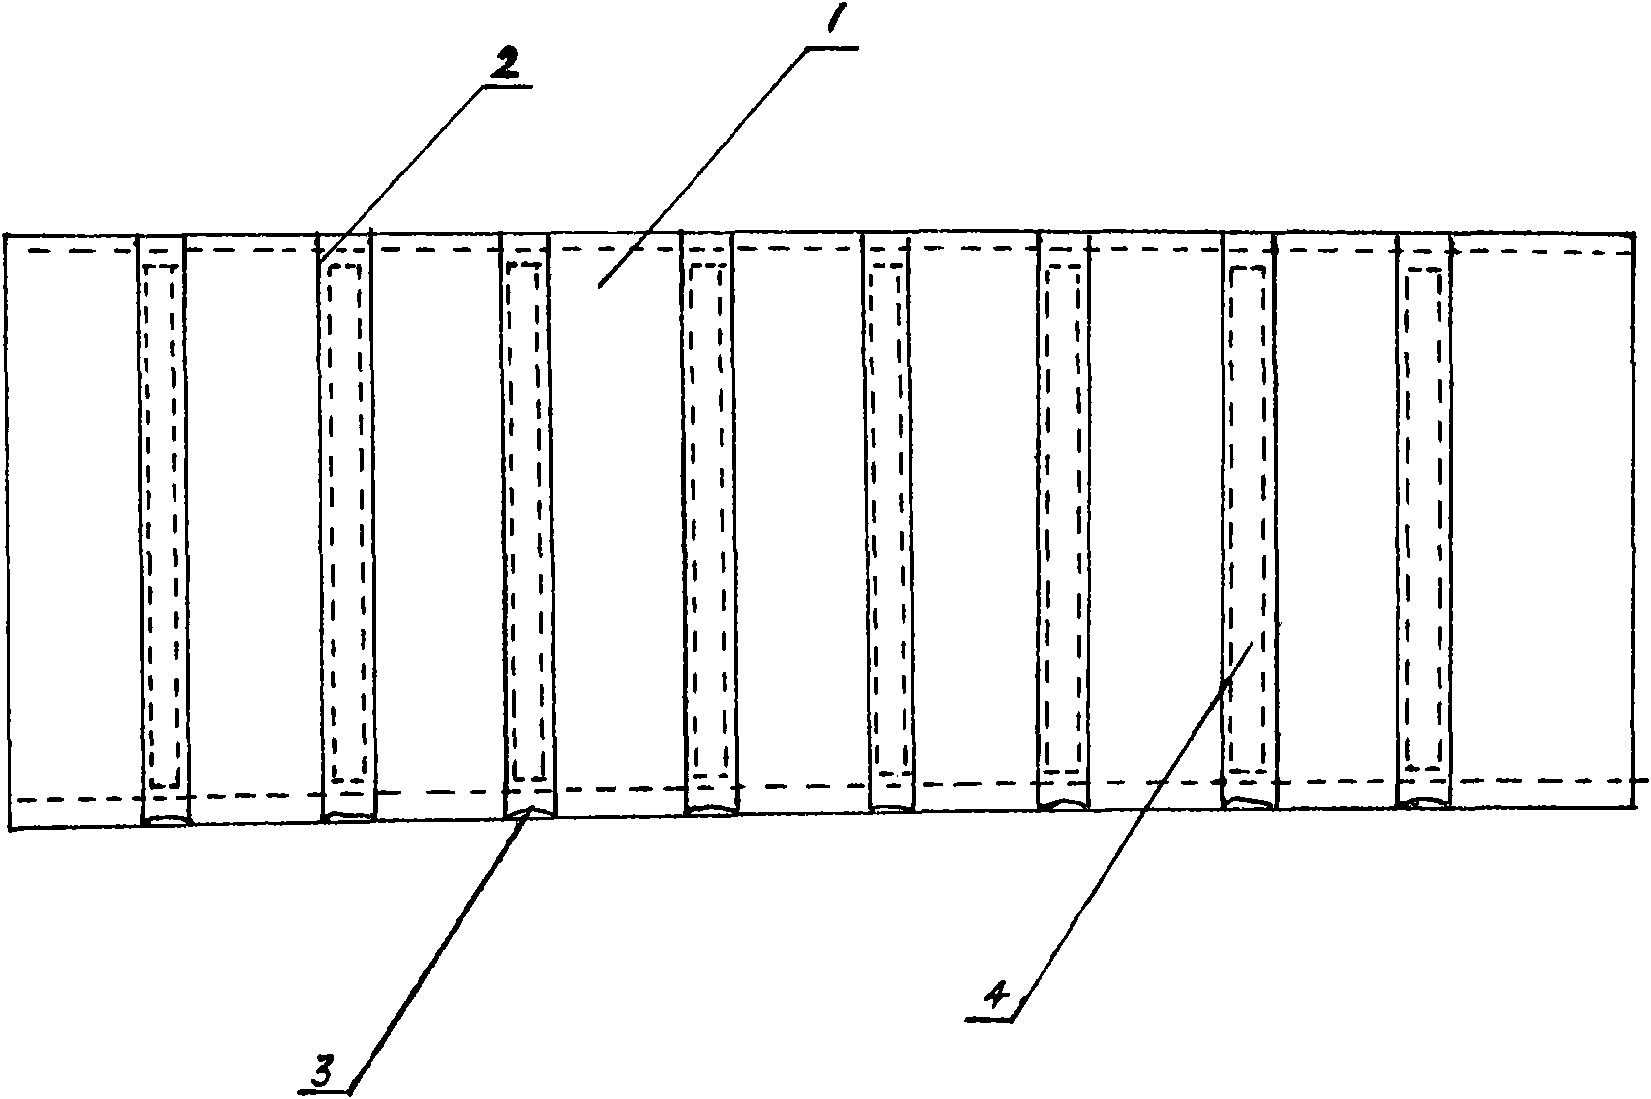 Automobile-covering cloth body capable of being placed with intermediate liner